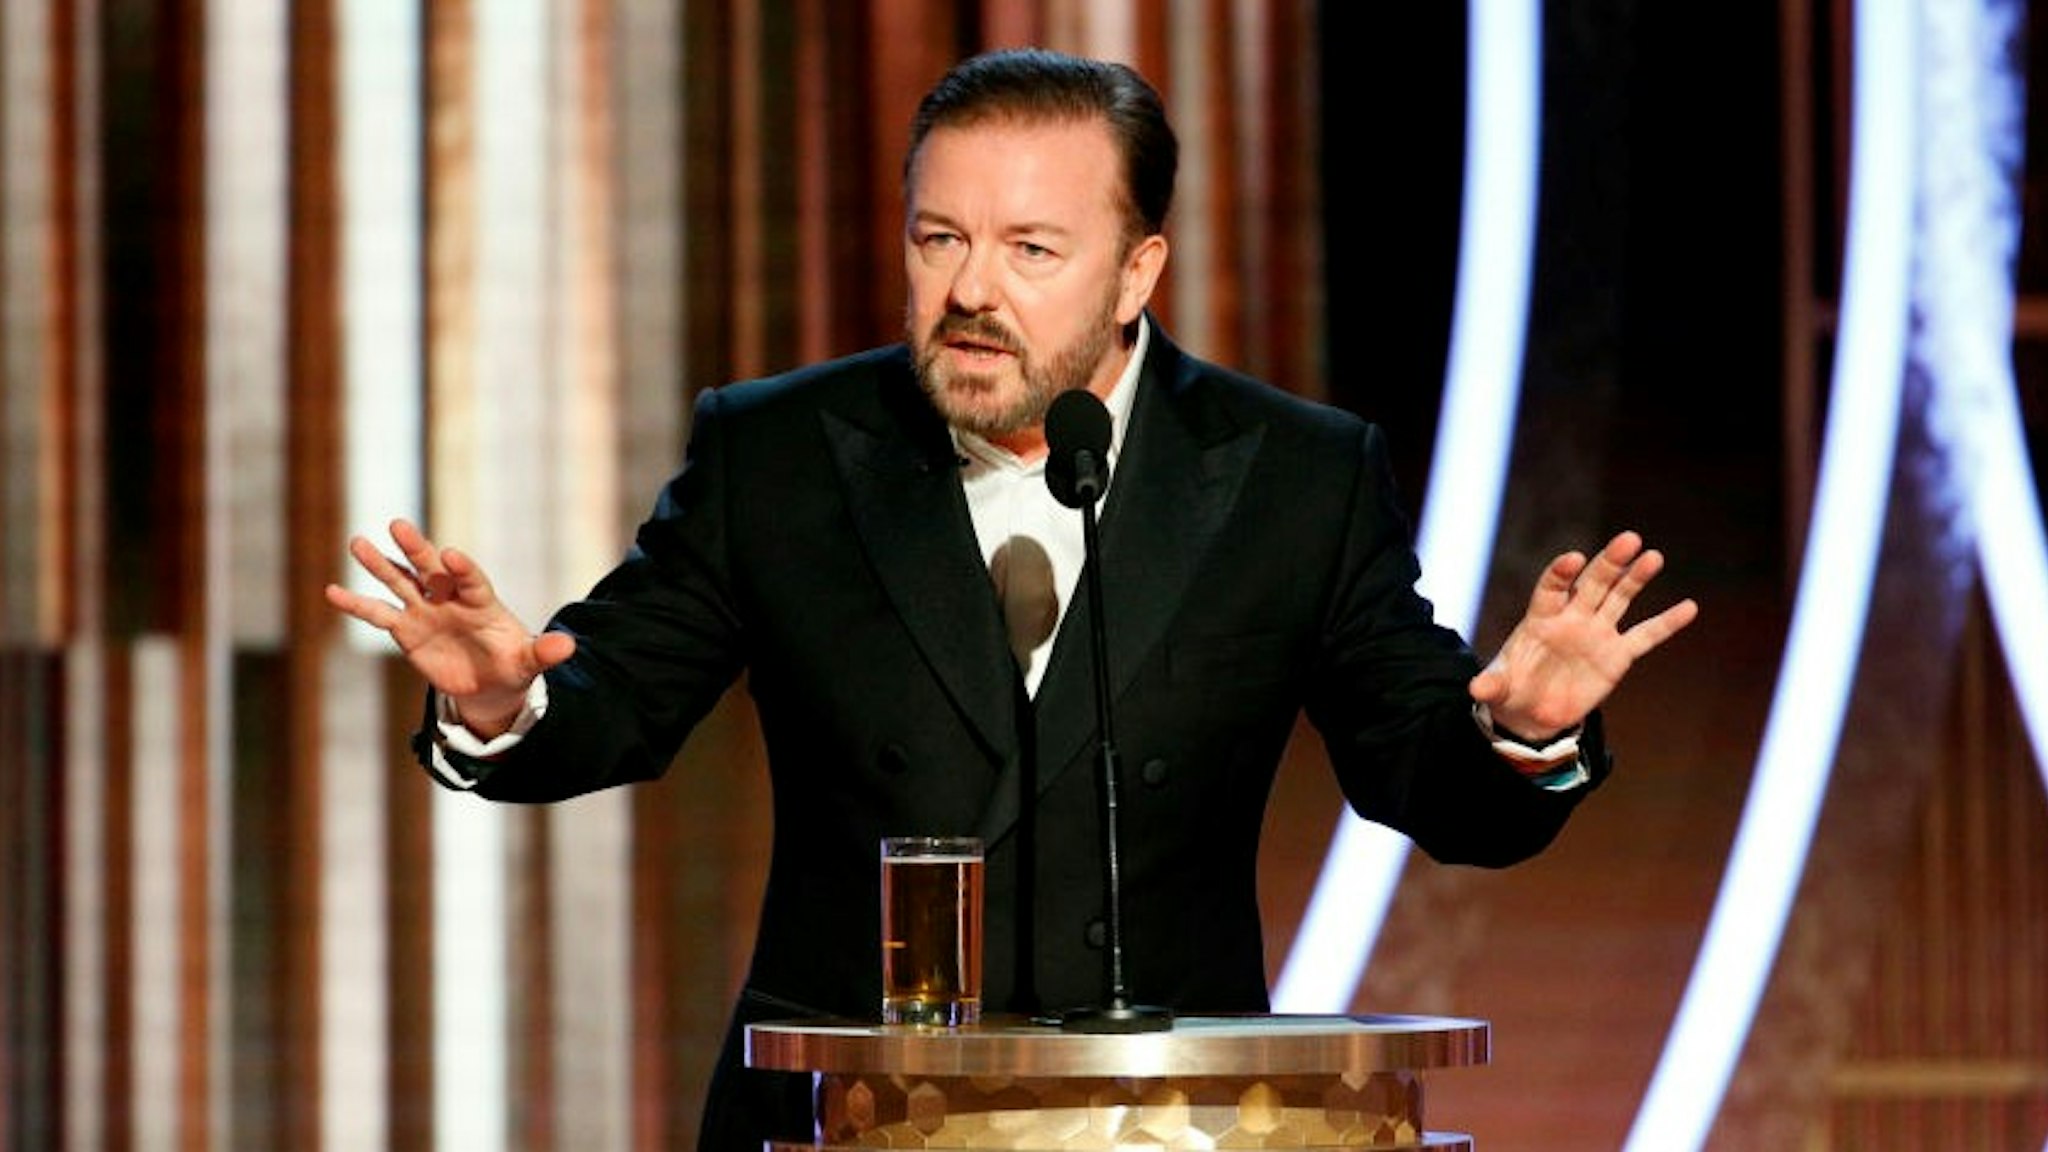 host Ricky Gervais speaks onstage during the 77th Annual Golden Globe Awards at The Beverly Hilton Hotel on January 5, 2020 in Beverly Hills, California.